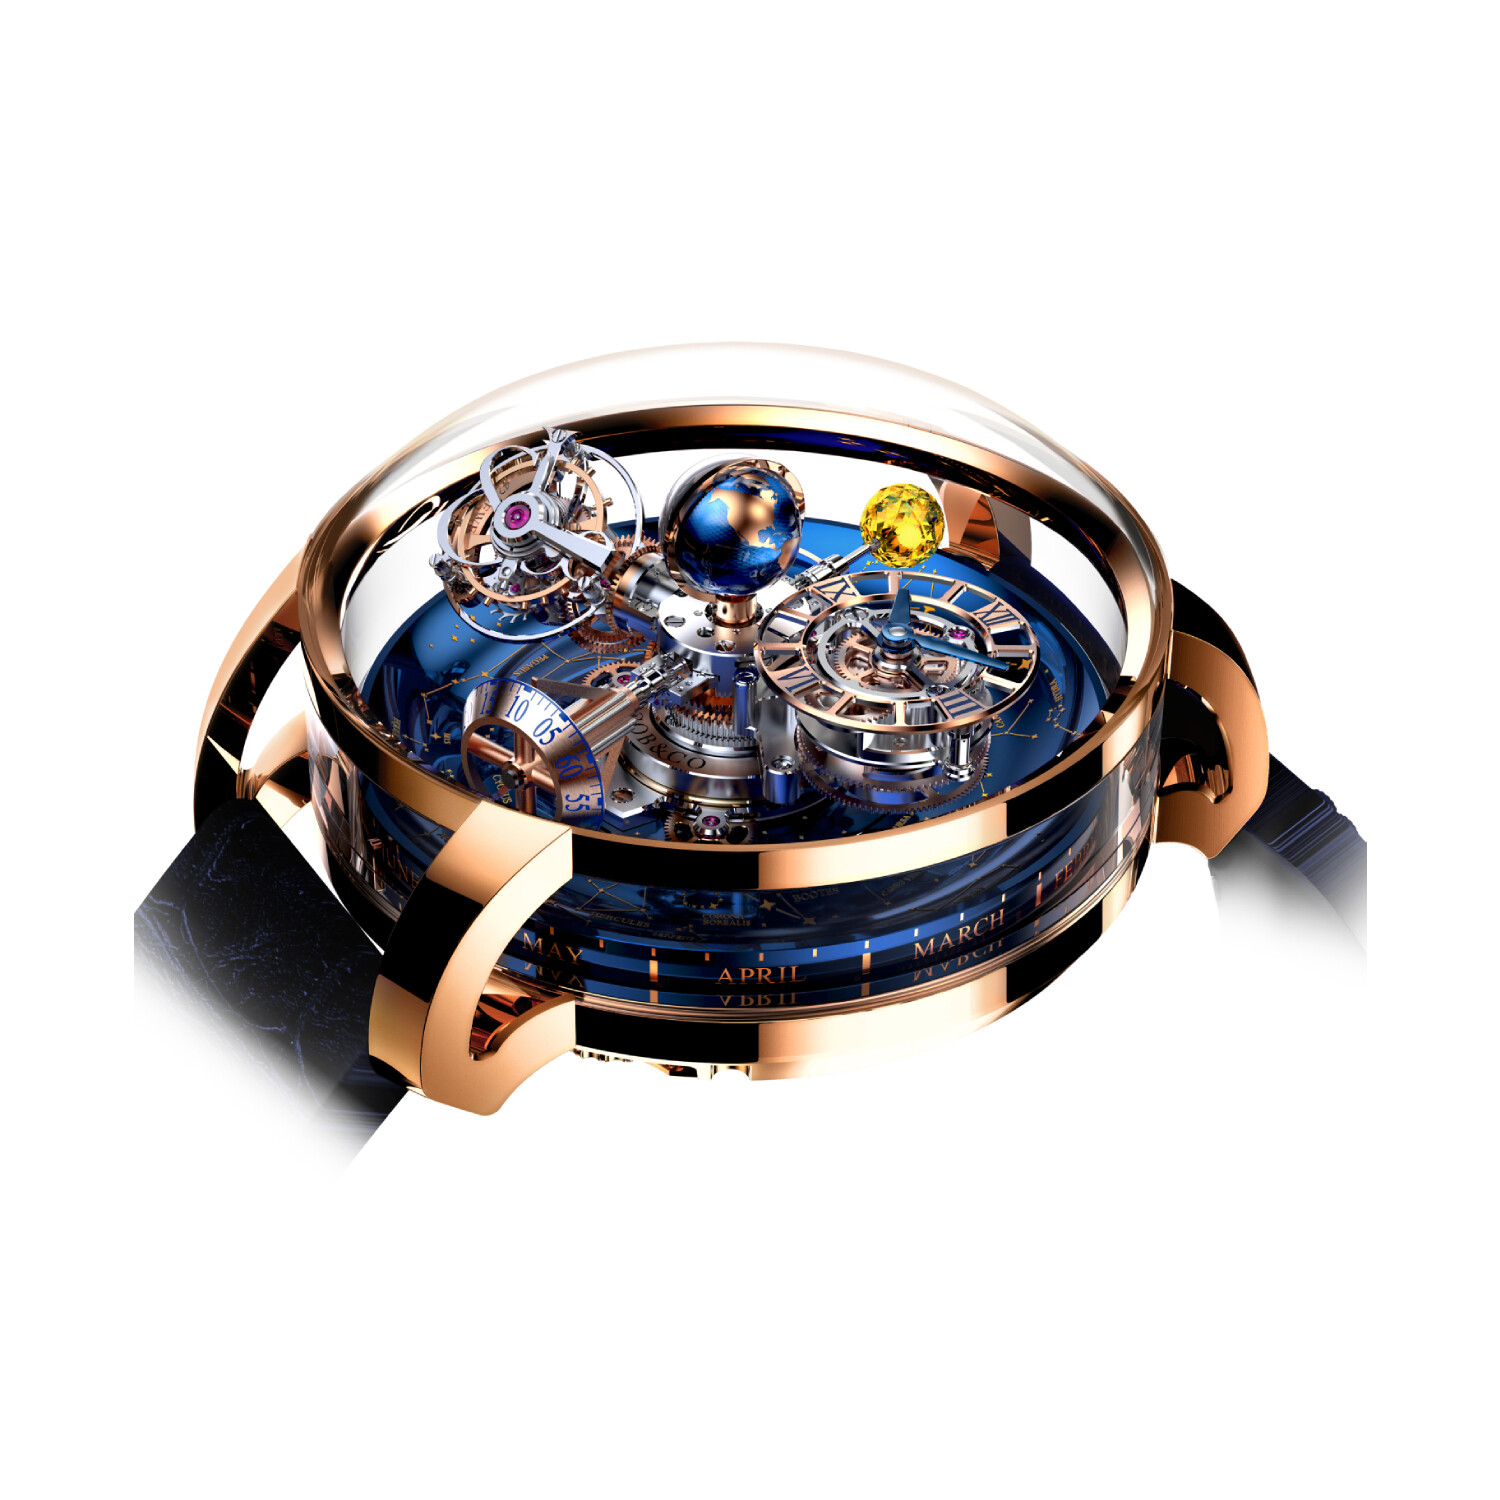 Jacob & Co. Astronomia Casino 47 mm Watch in Skeleton Dial